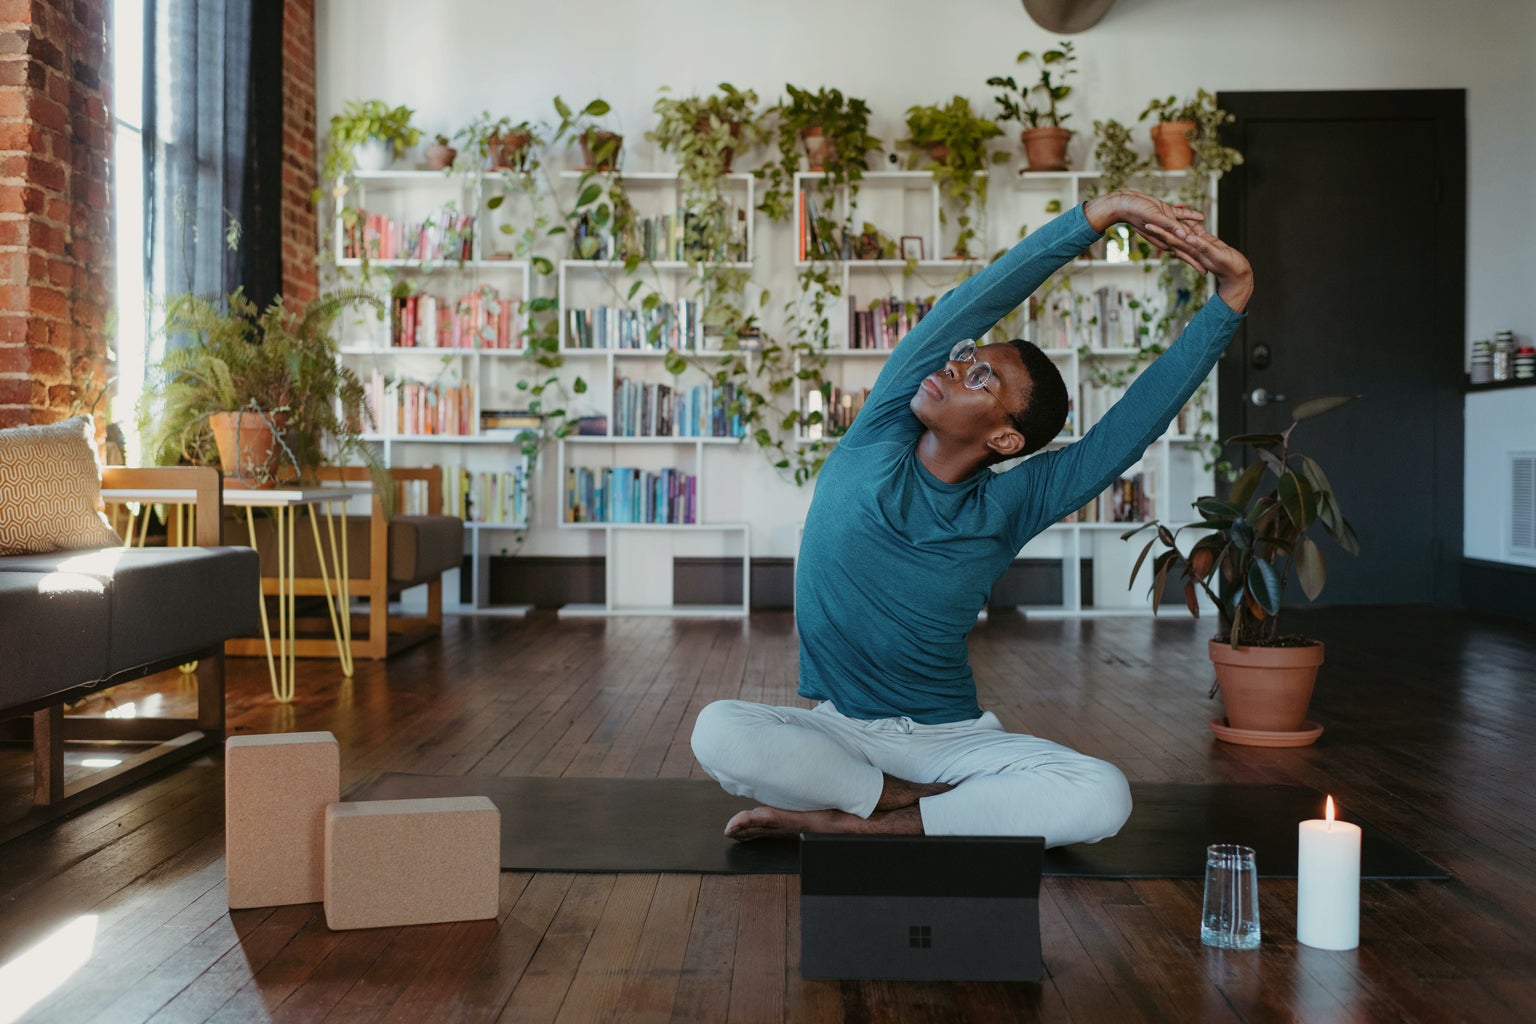 A man stretching on a yoga mat, a candle, a glass of water and boxes before him and bookshelves and plants behind him